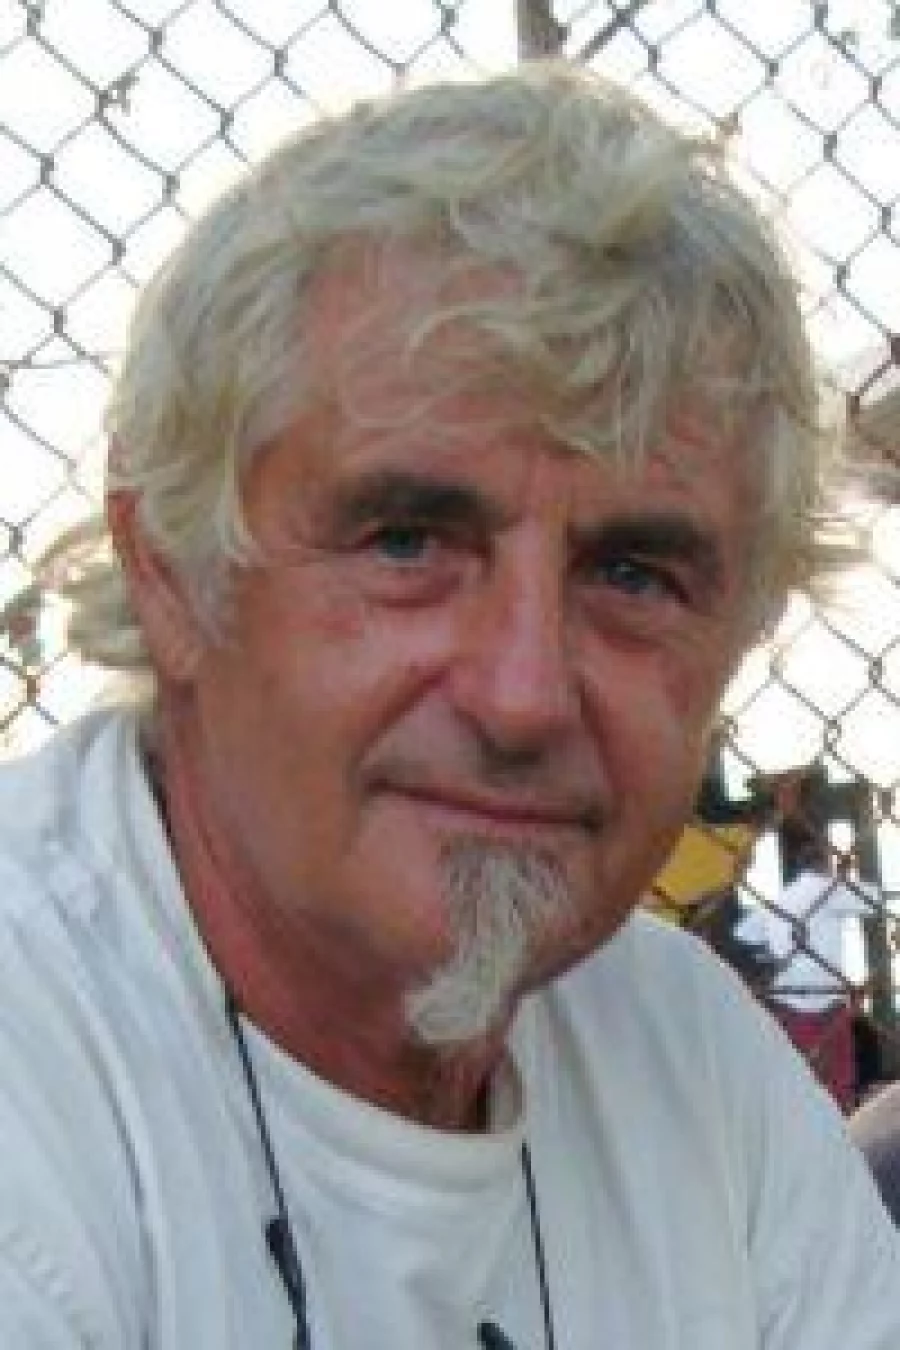 (FILES) This file photo taken on May 5, 2009 shows German national Jurgen Kantner posing for a photograph in Berbera. Islamic militants in the Philippines have killed a German hostage, Jurgen Kantner, the SITE Intelligence group said on February 27, 2017. / AFP PHOTO / MUSTAFA ABDI